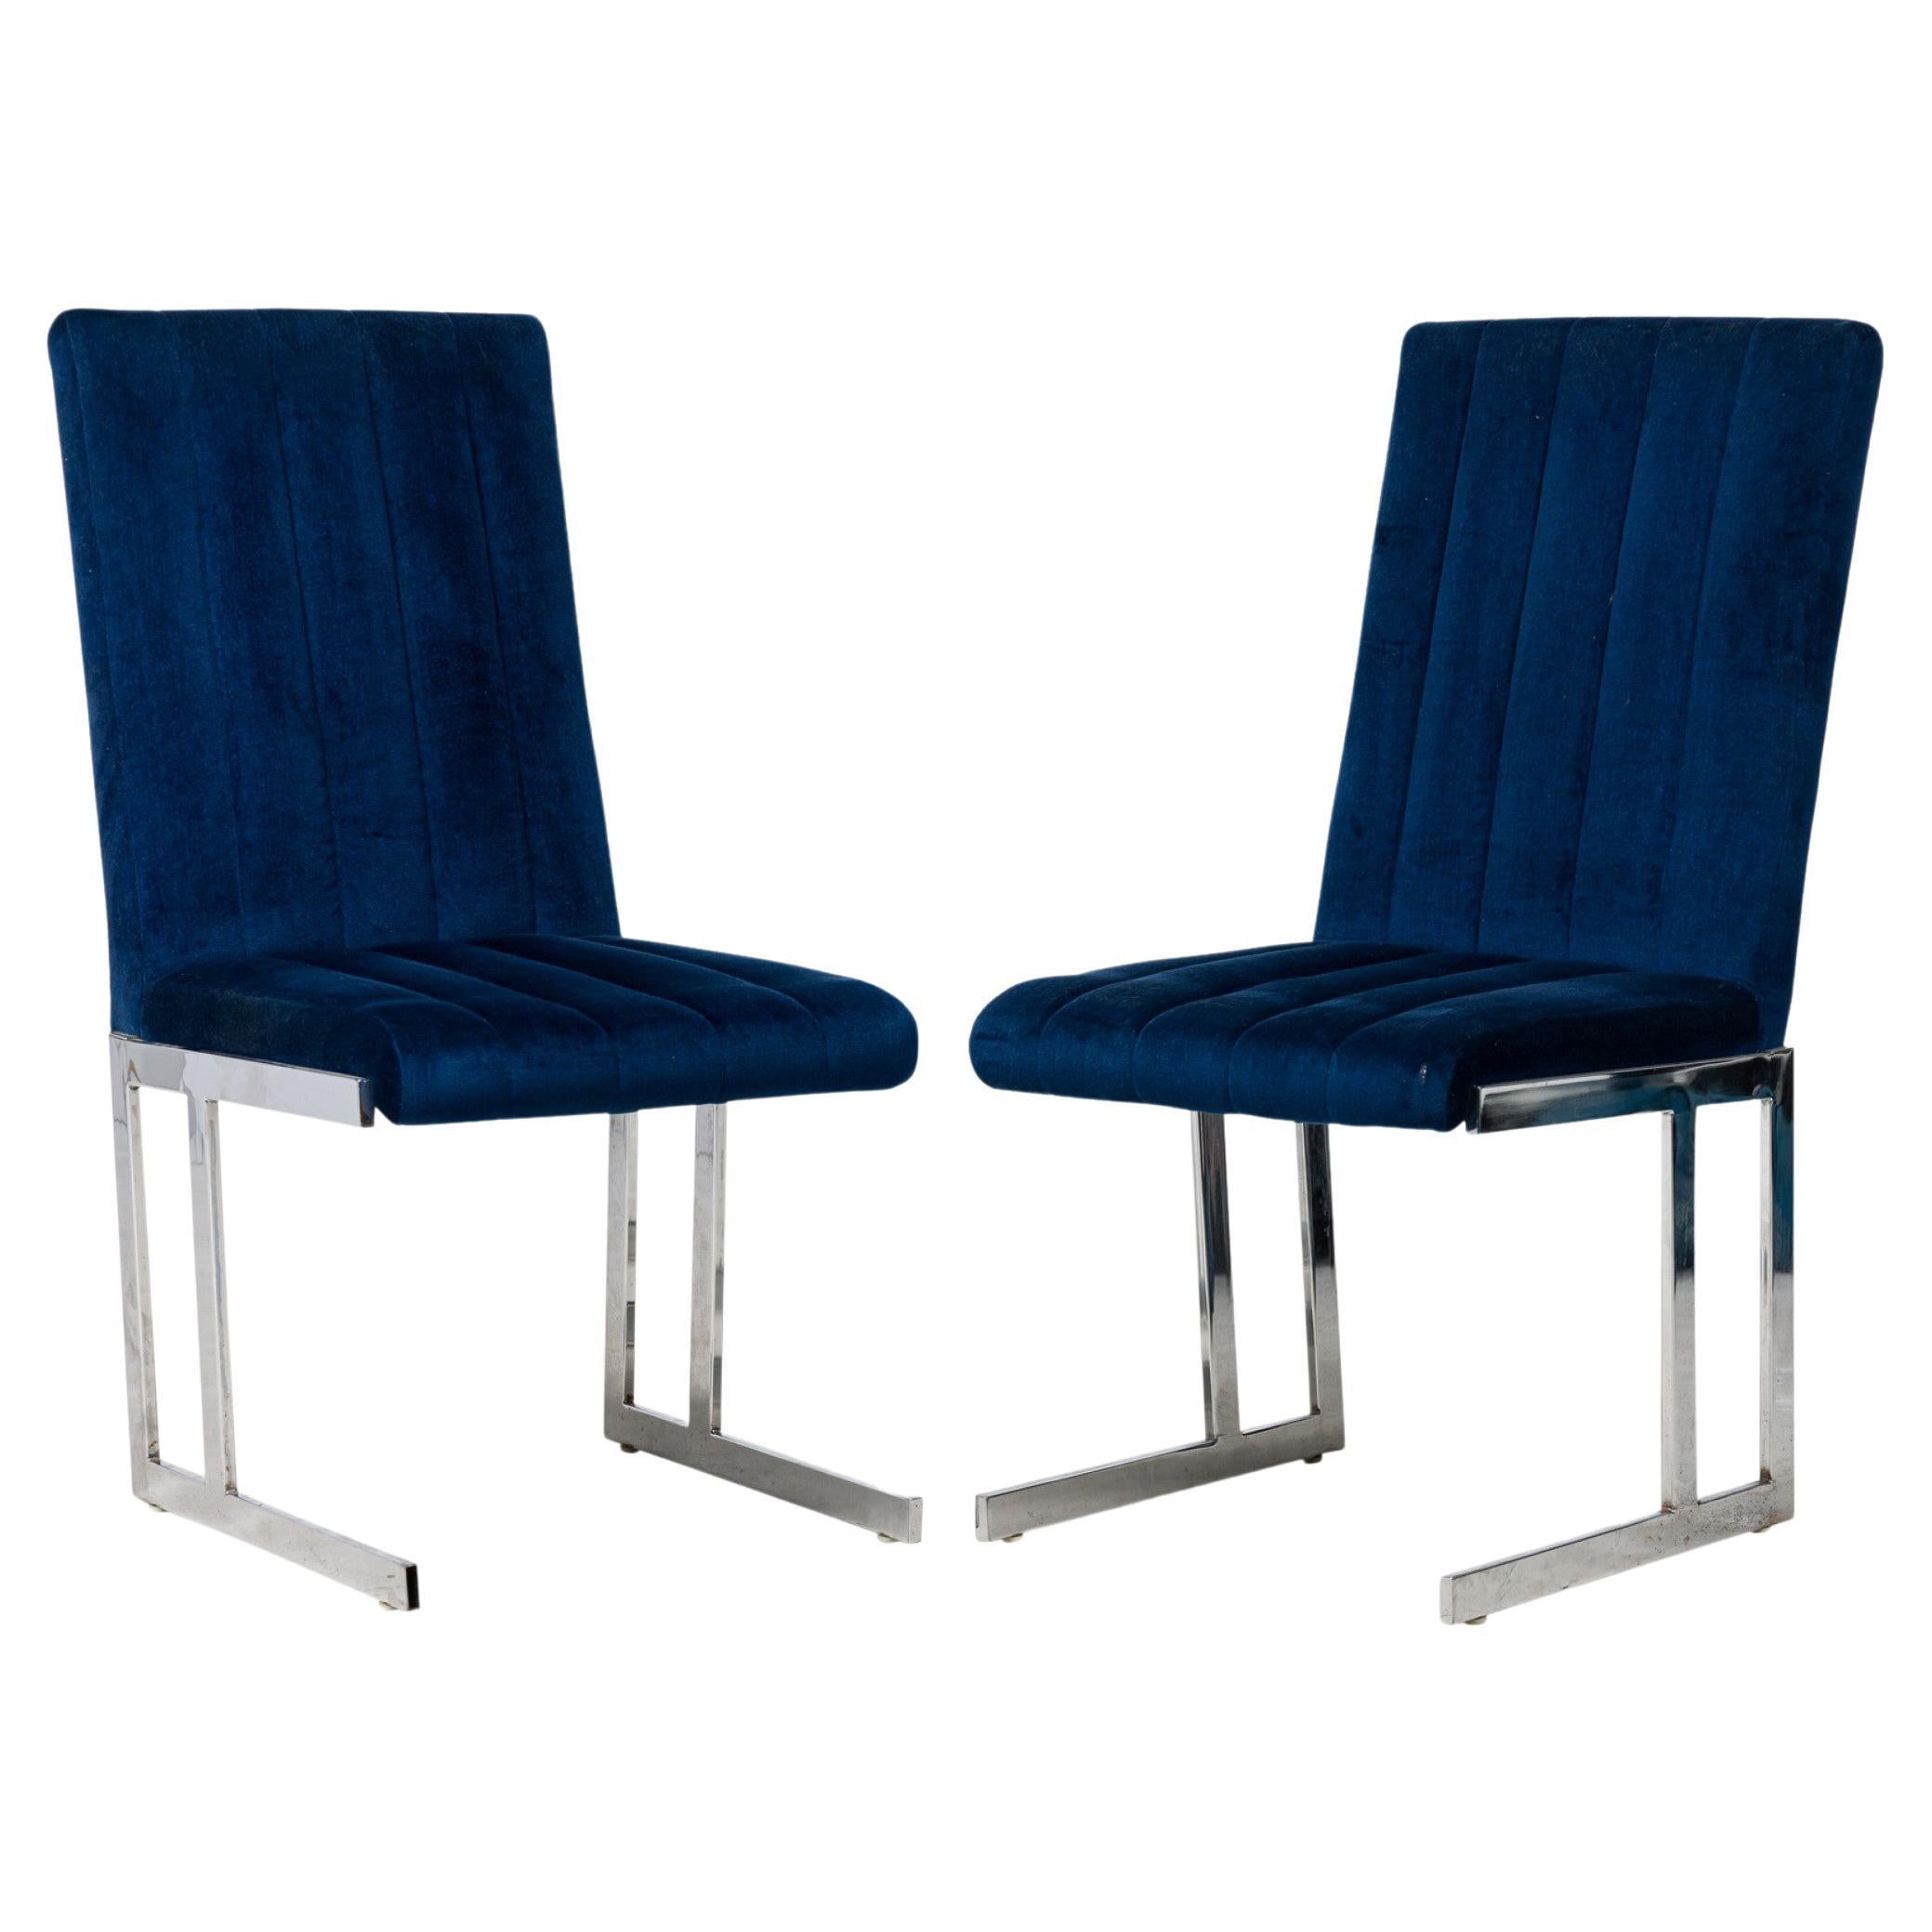 Four Mid-Century Modern Chrome Dining Chairs, Attributed to Milo Baughman For Sale